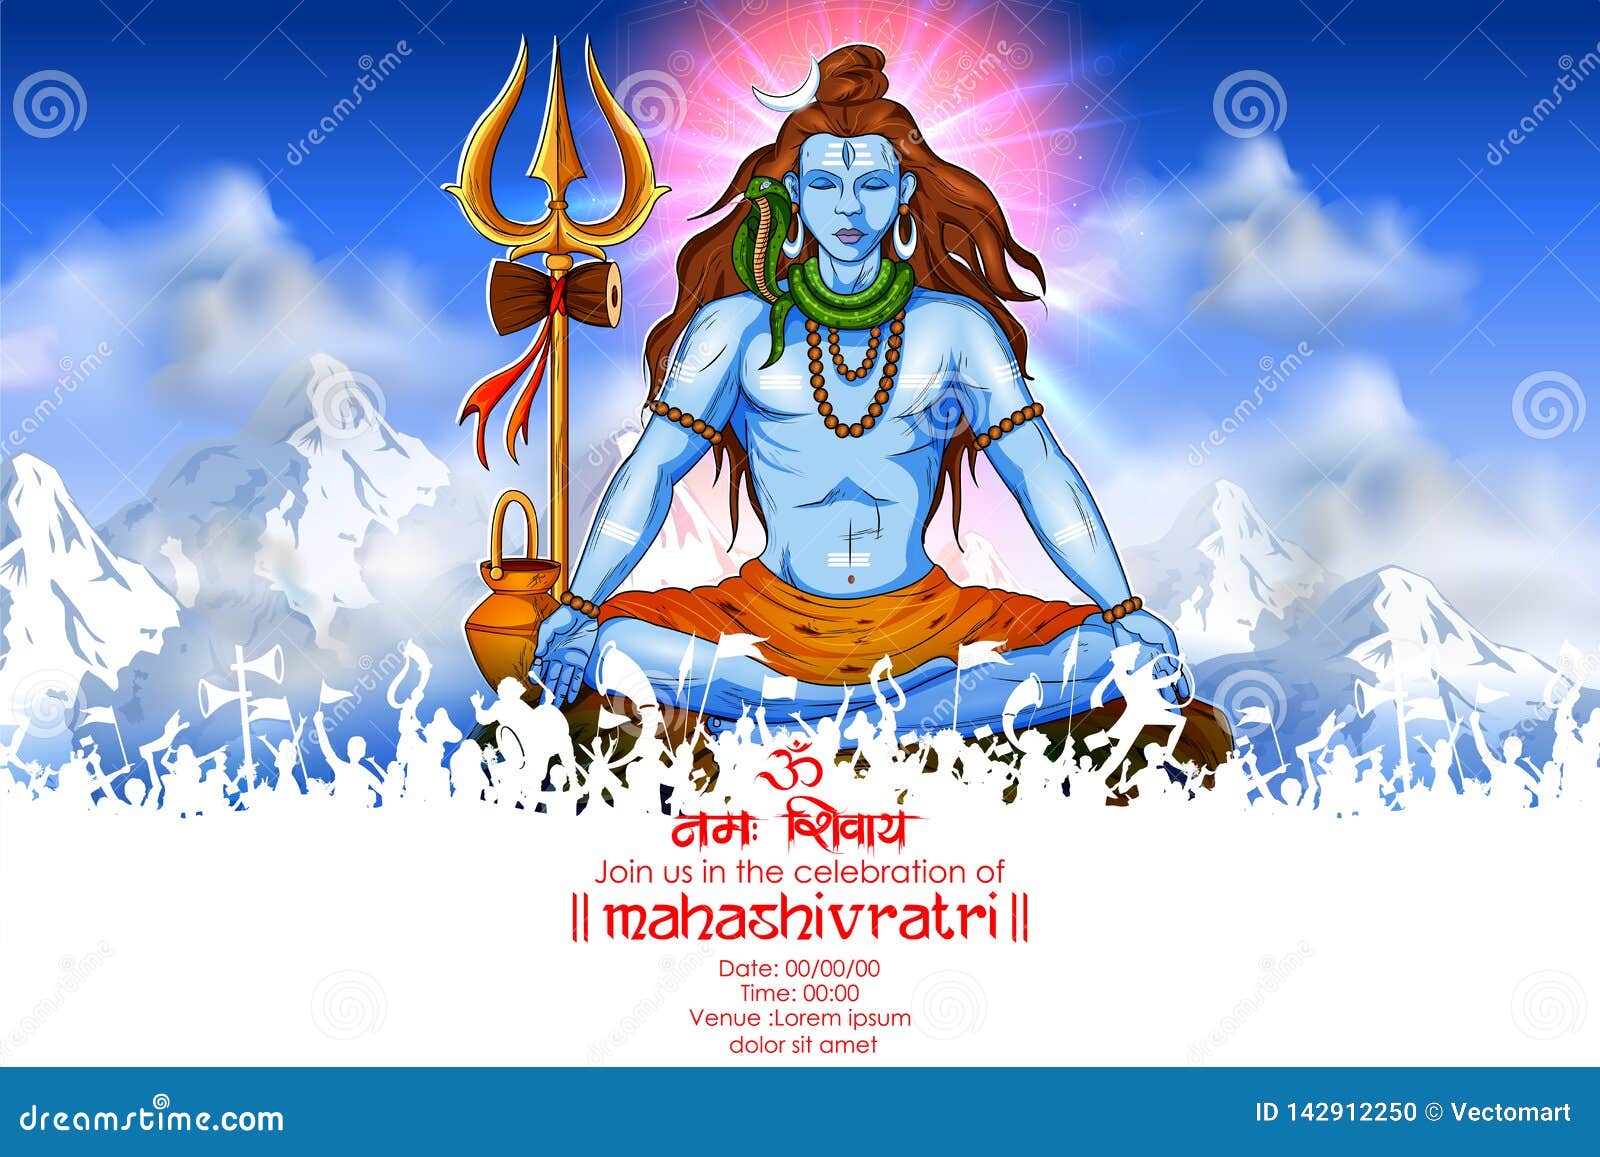 Discover the Mystique of Shivratri with Our Captivating Full HD Images